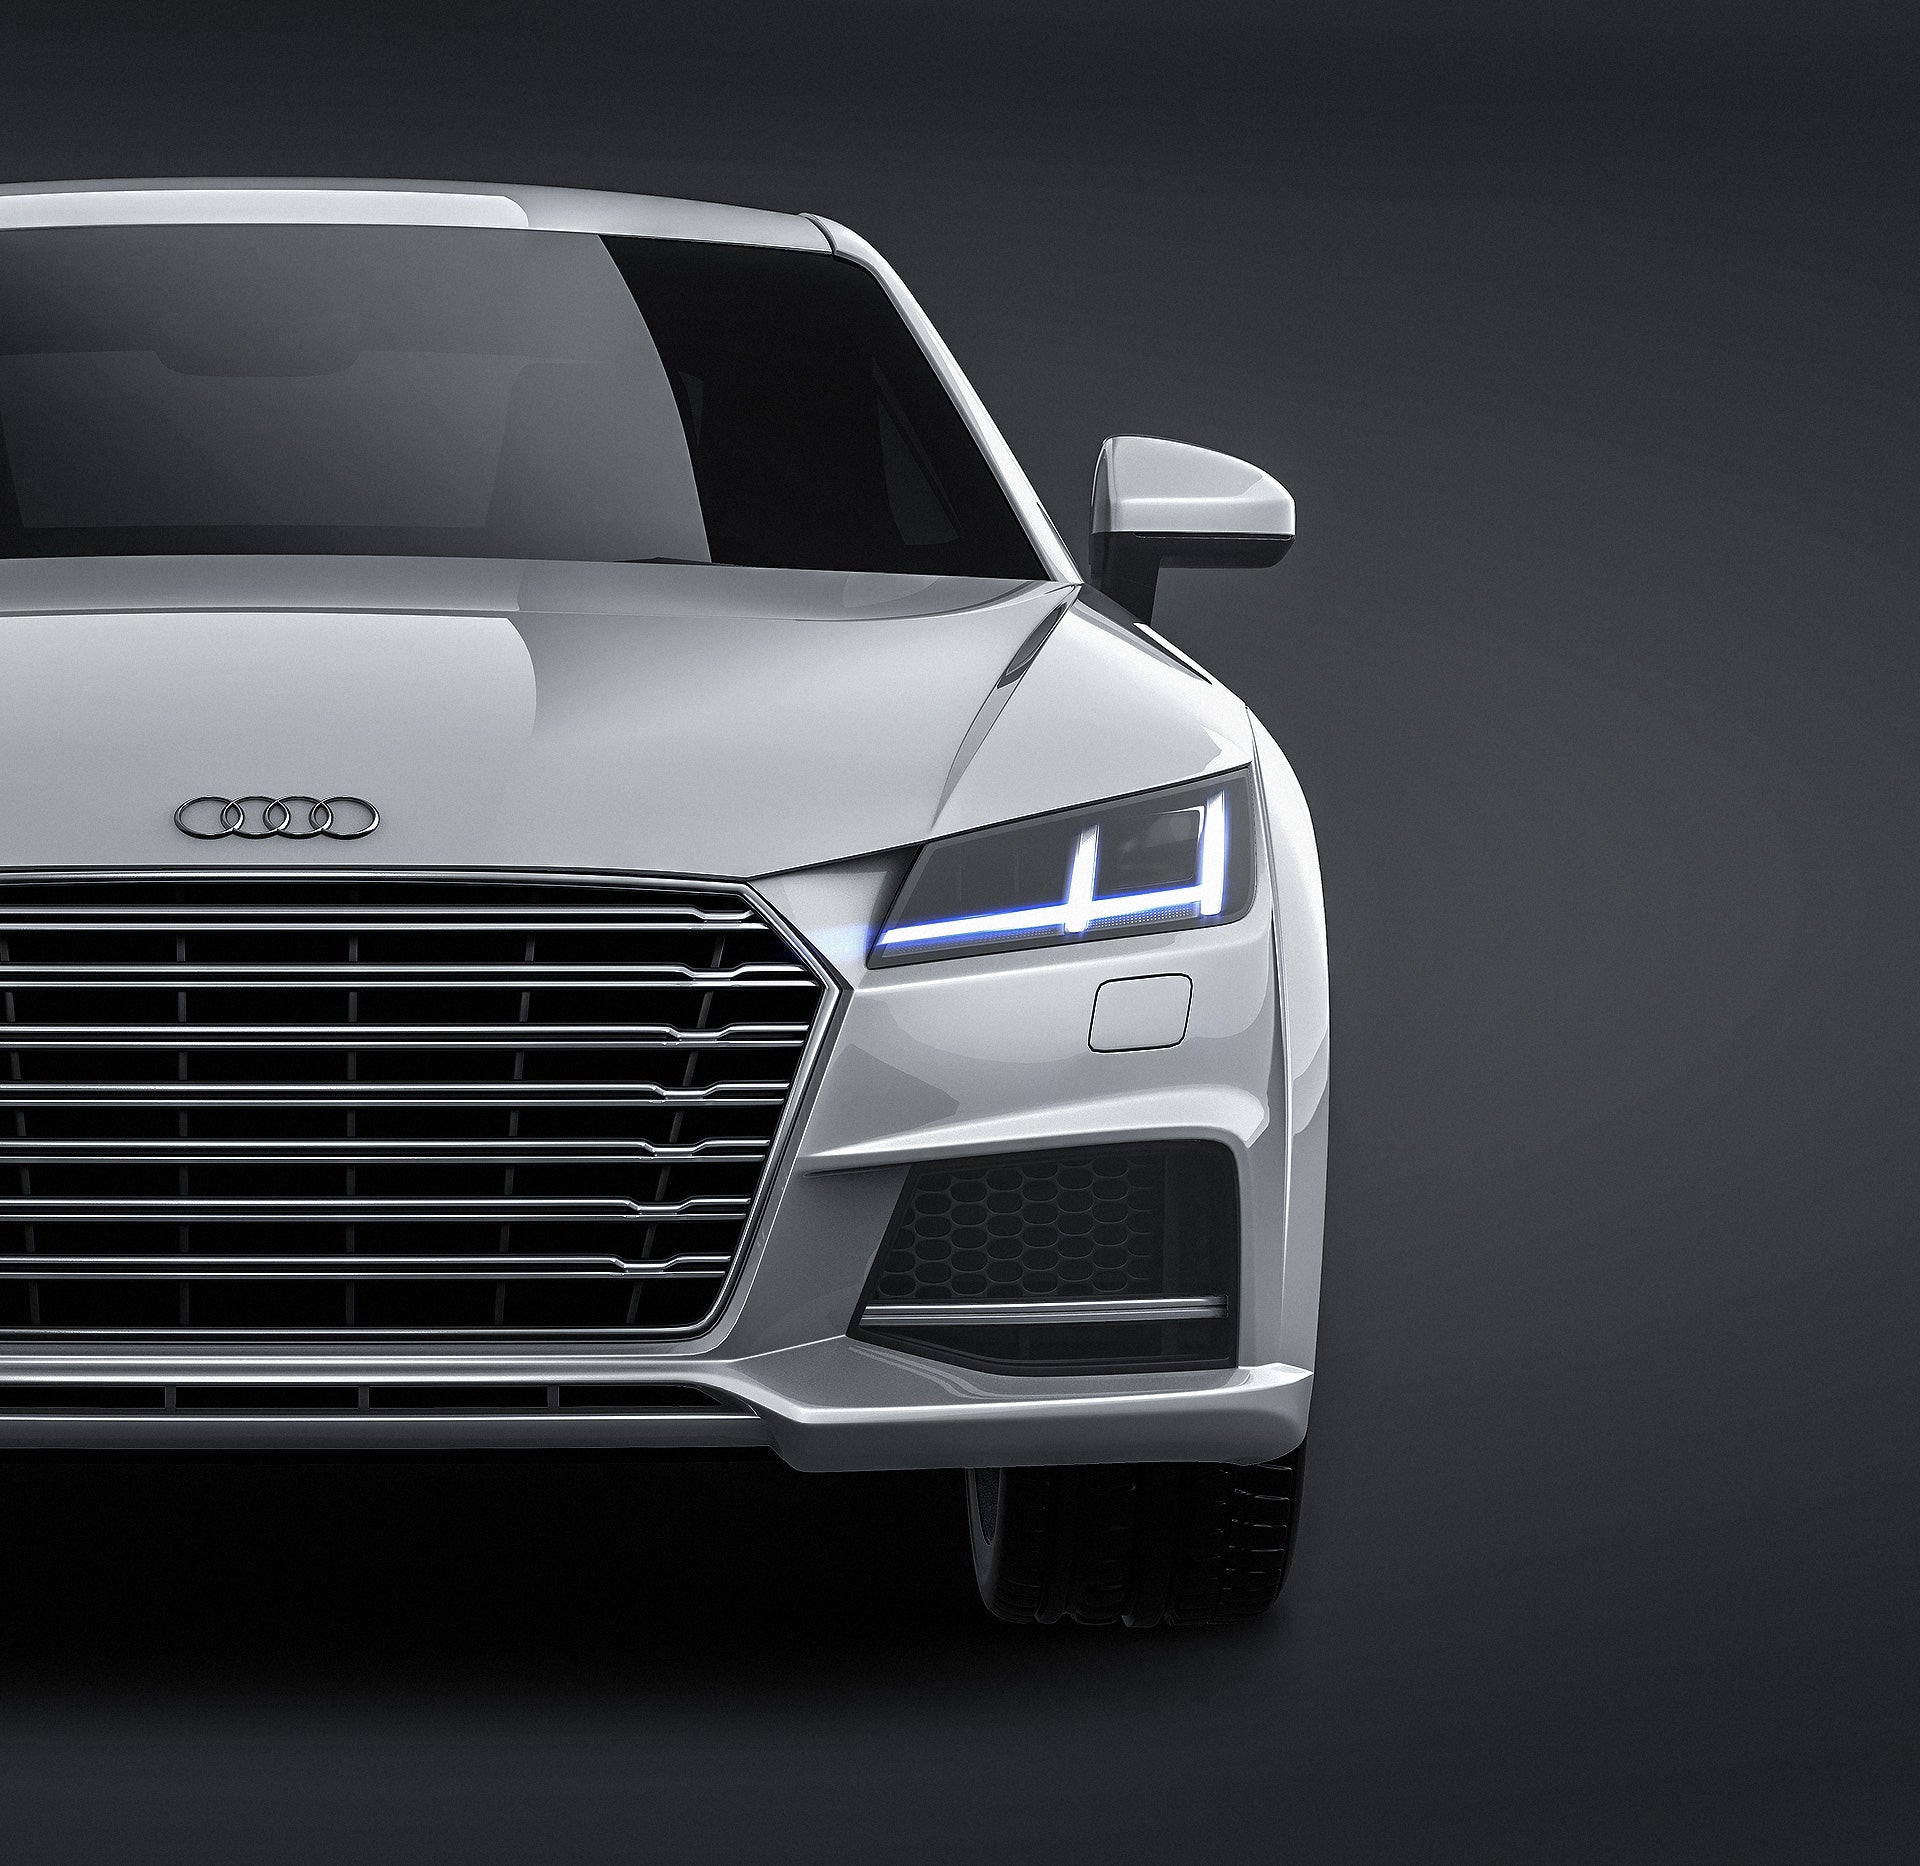 Audi TTS Coupe 2015 glossy finish - all sides Car Mockup Template.psd